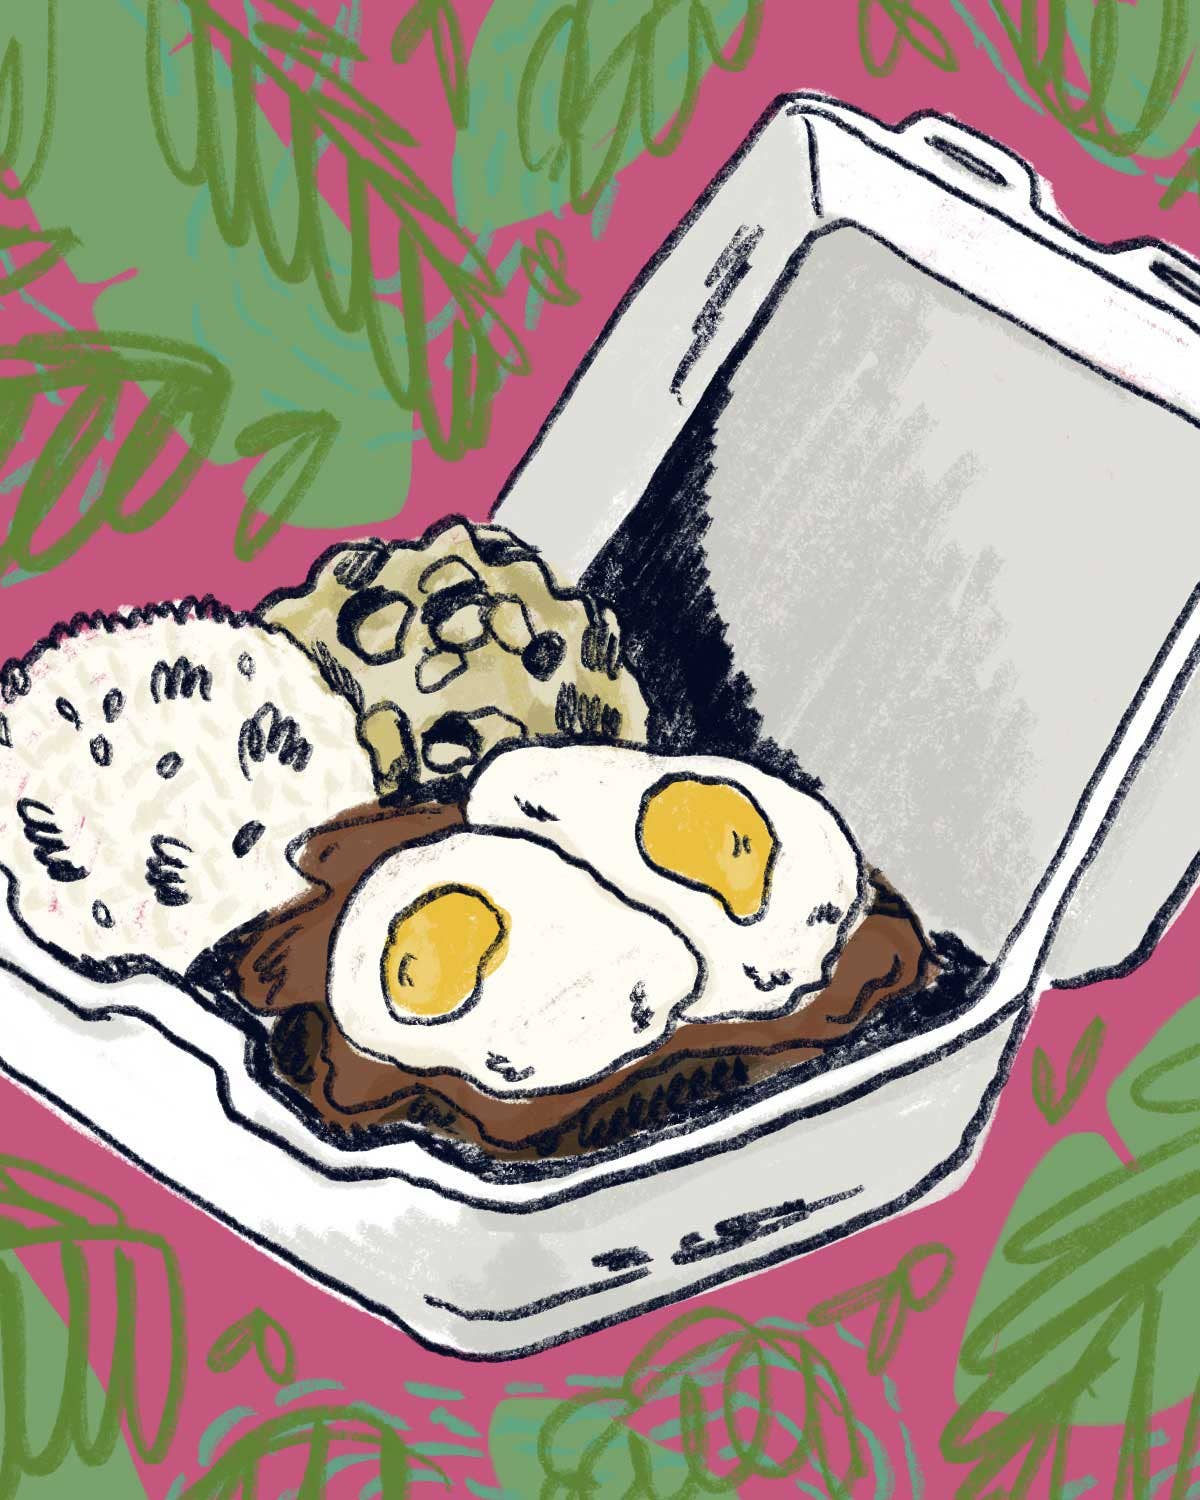 Celebrating the Humble, Greasy, Un-Instagram-able Hawaiian Plate Lunch